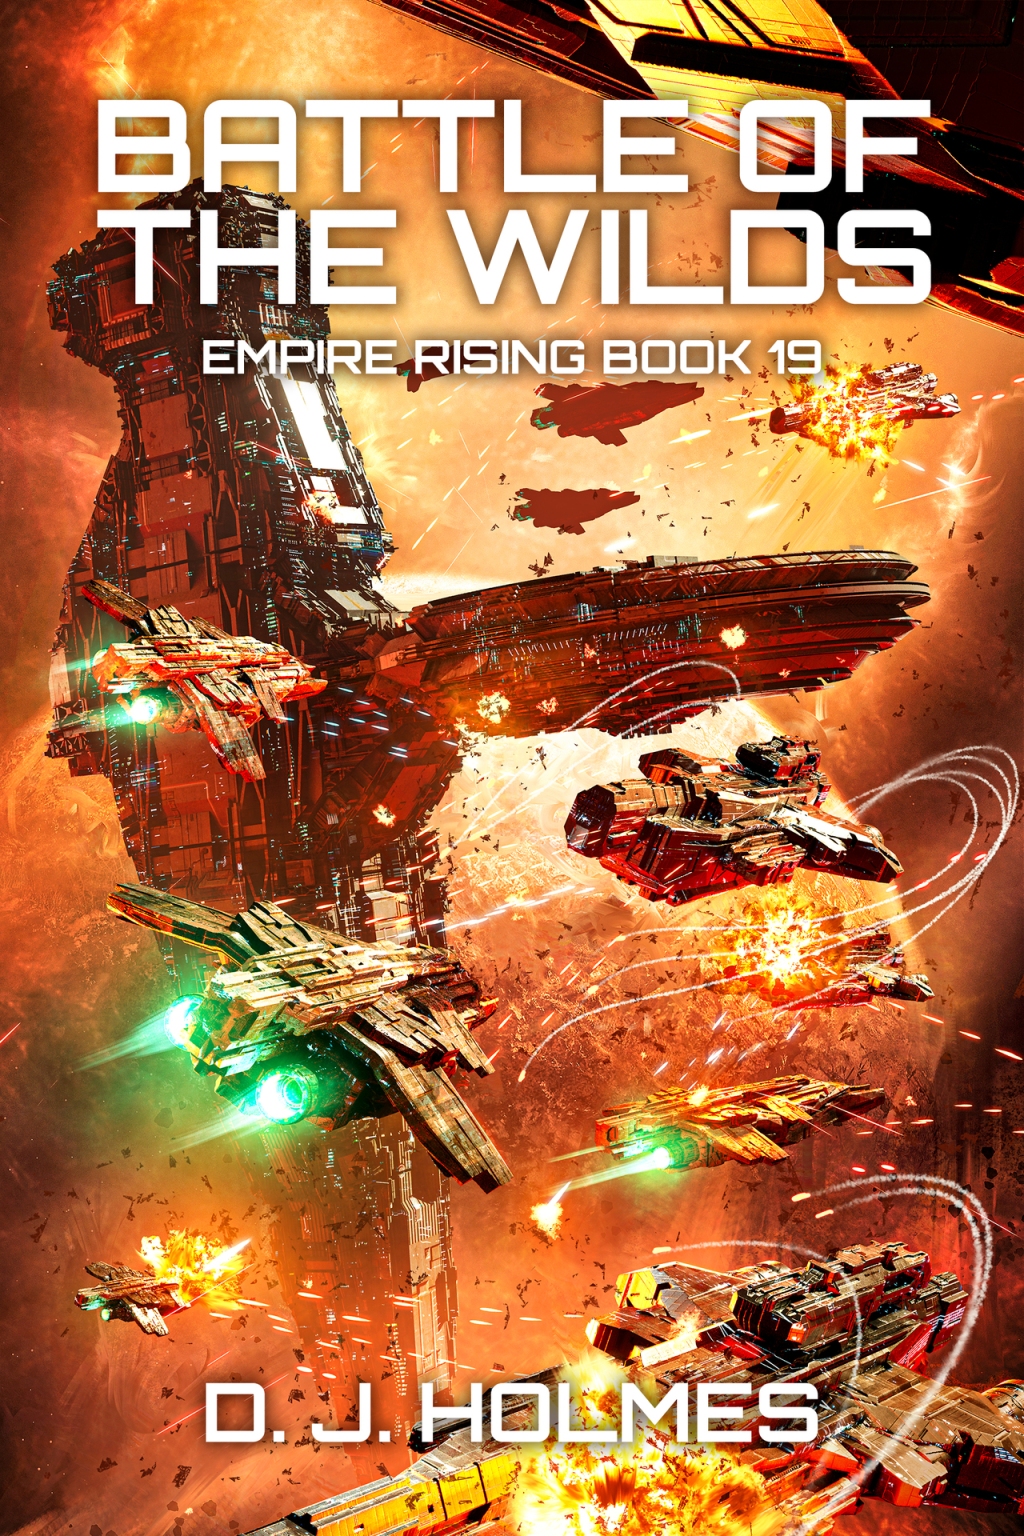 Battle of the Wilds – Another good one.